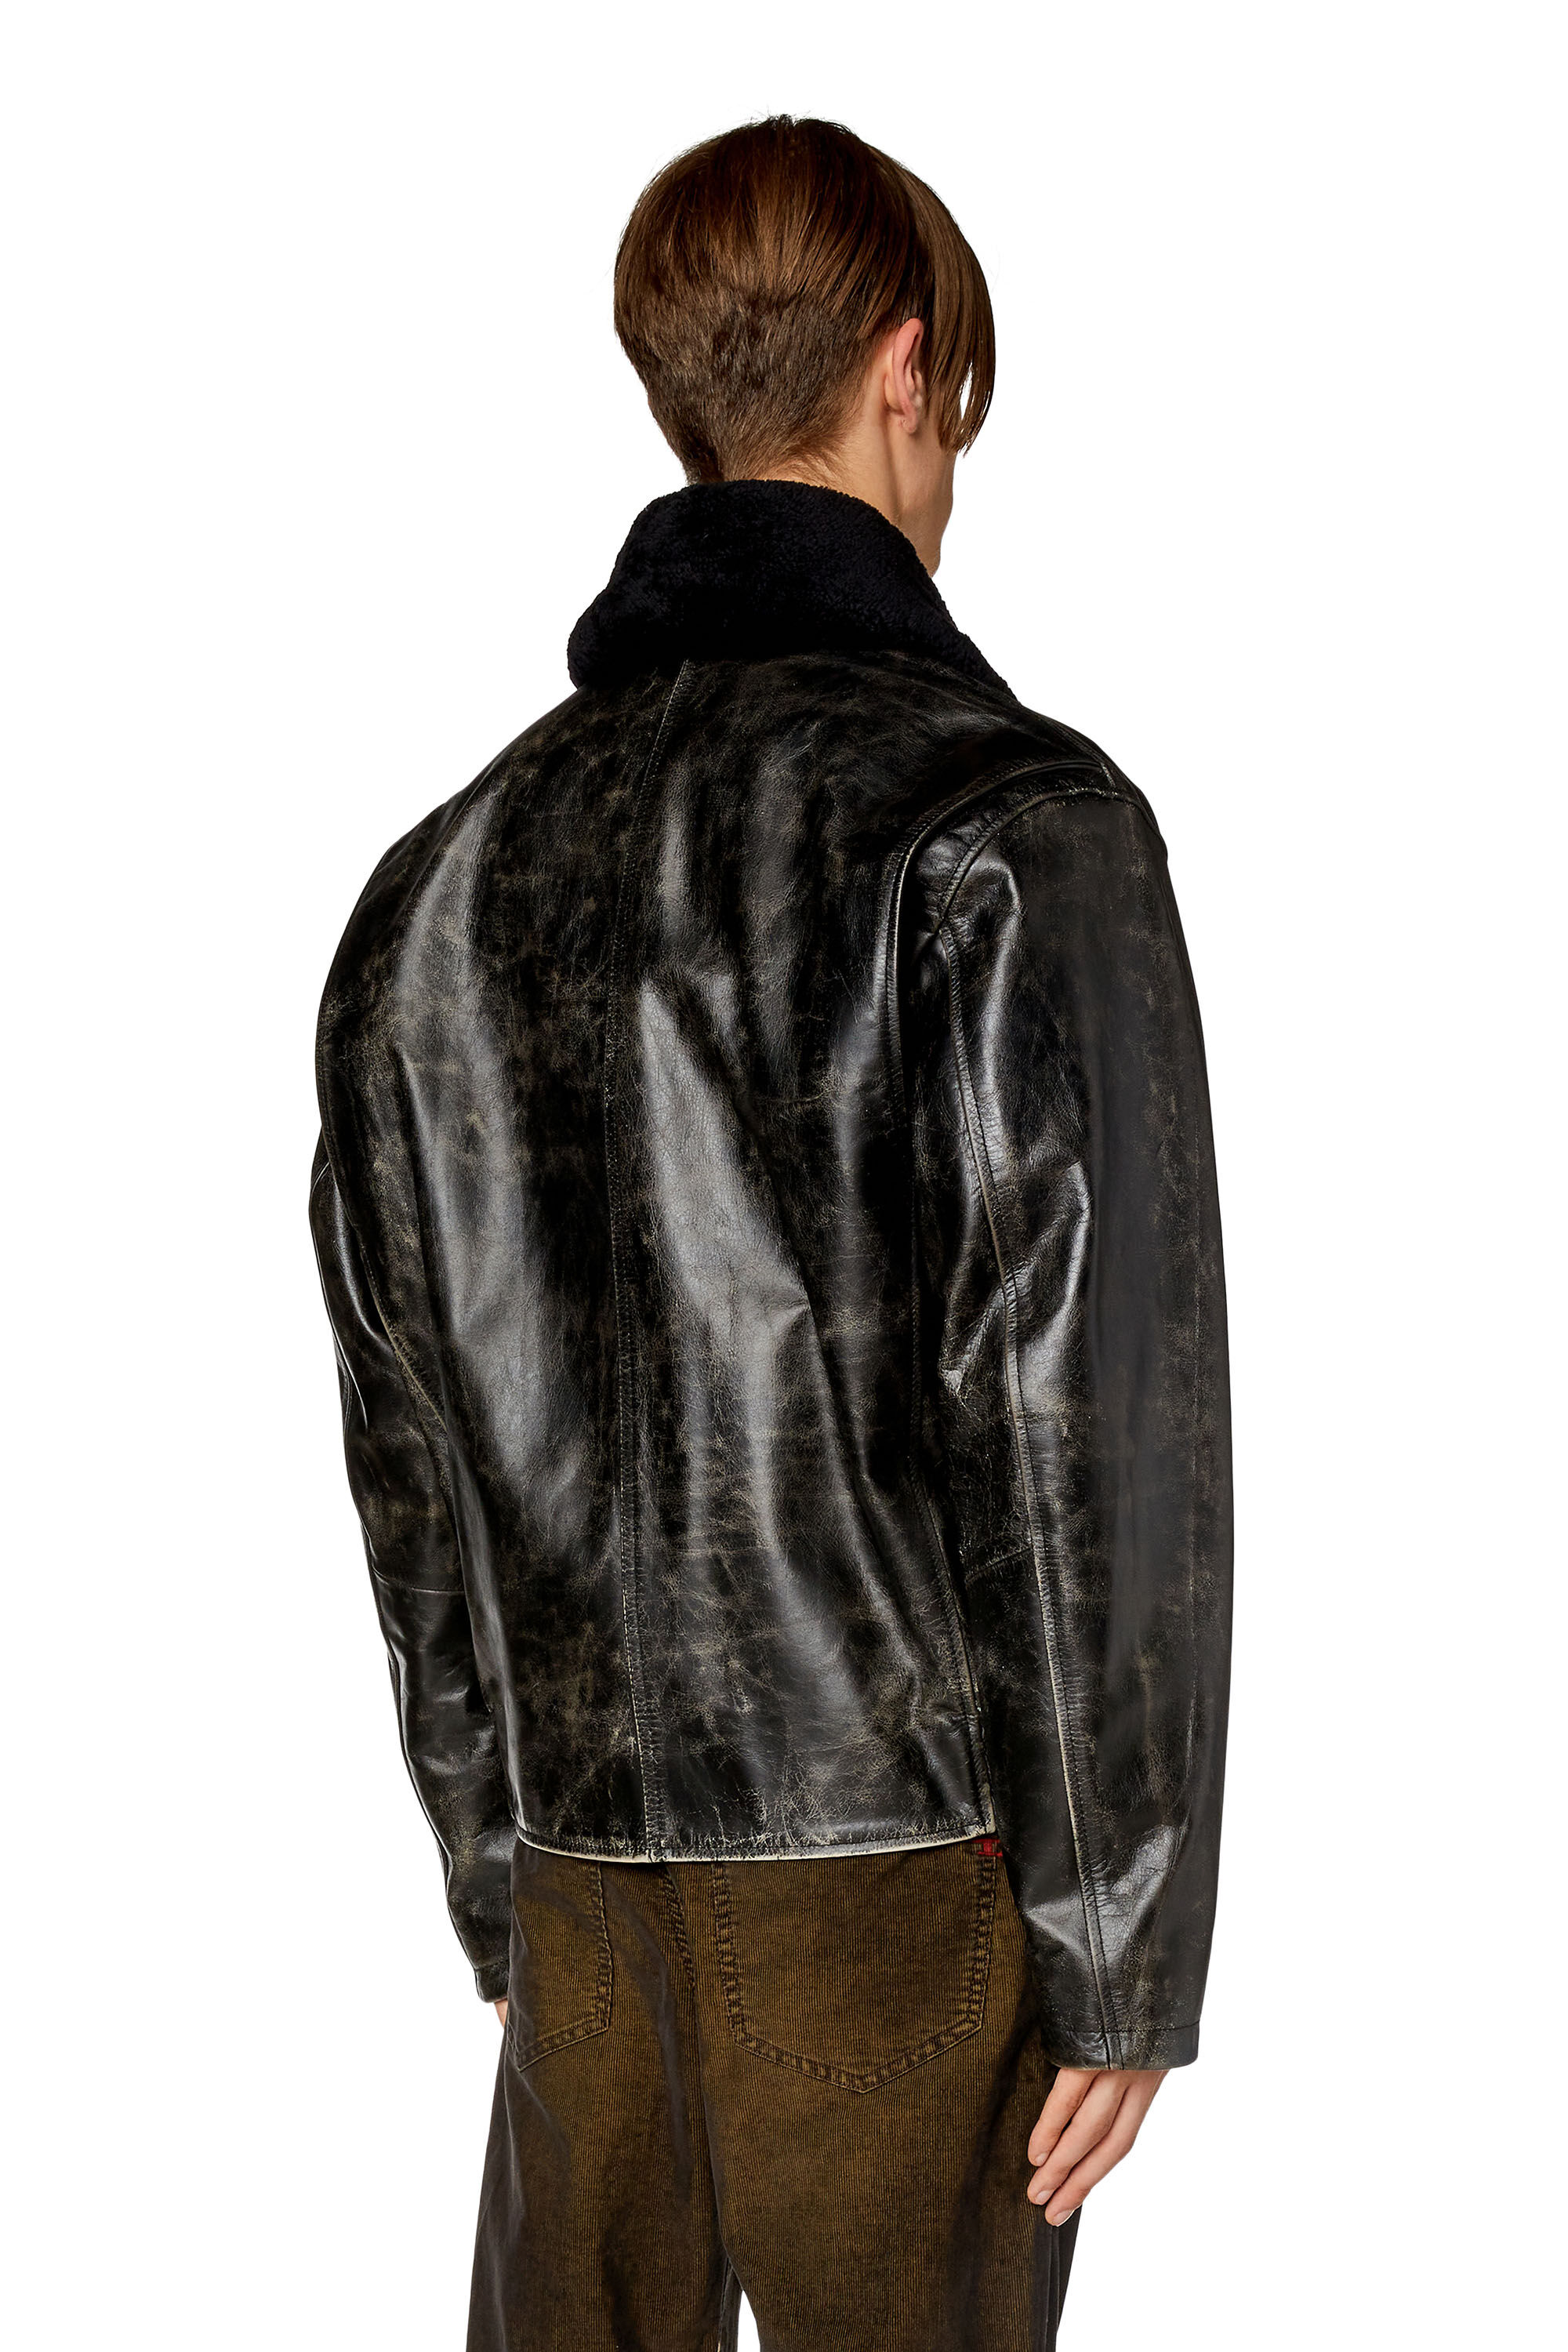 Men's Treated leather jacket with fleece collar | L-MUDS-FUR Diesel